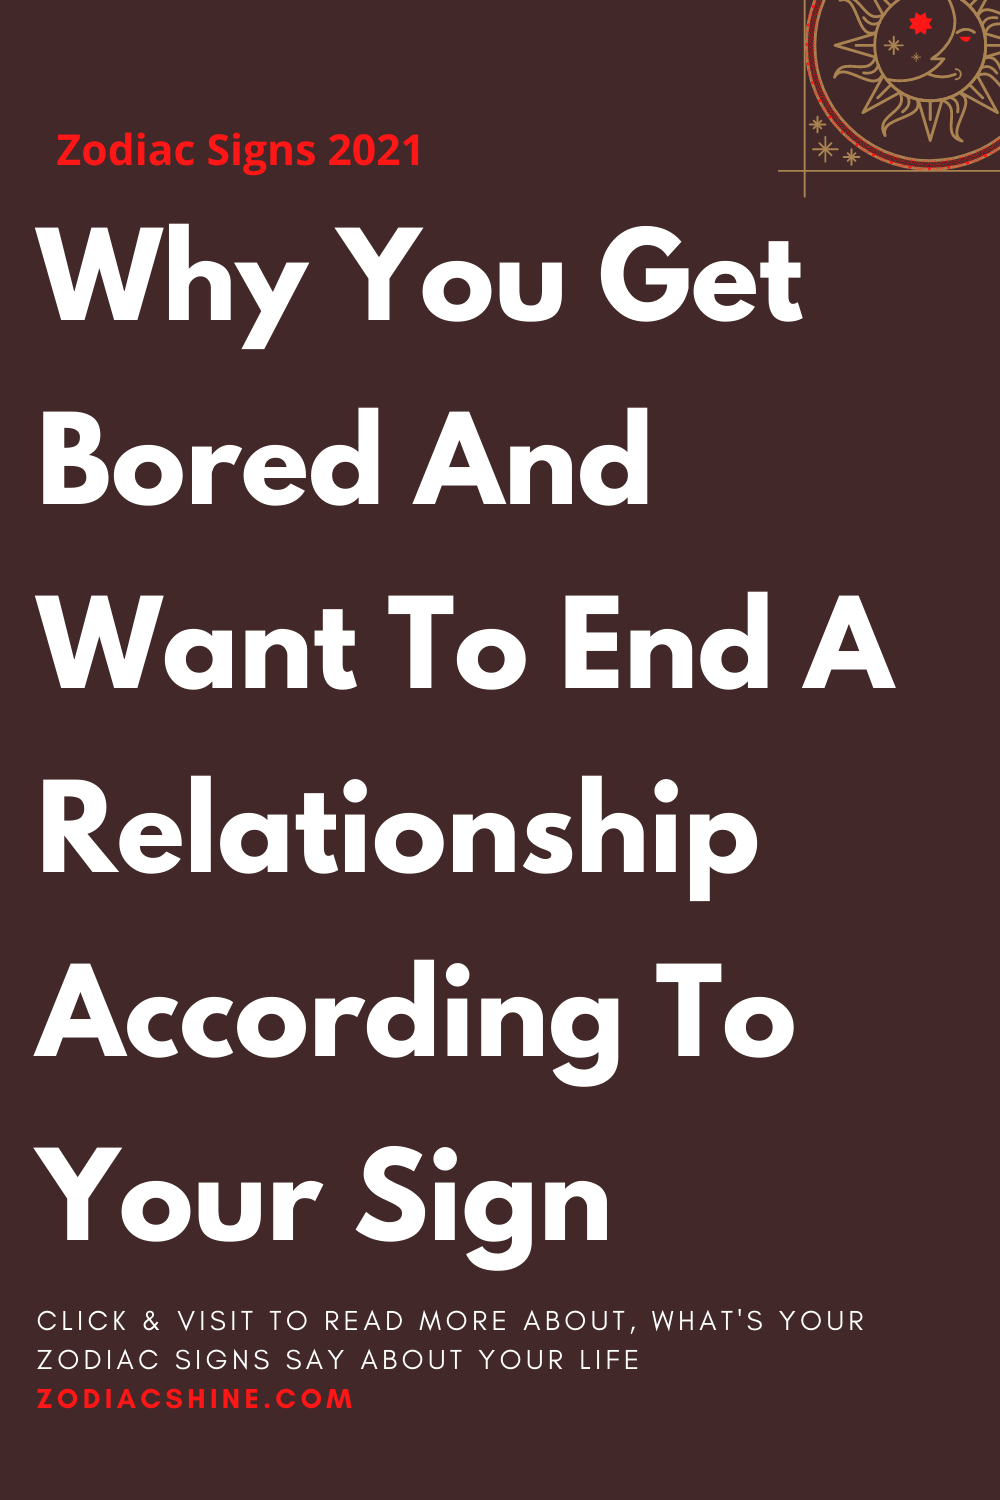 Why You Get Bored And Want To End A Relationship According To Your Sign